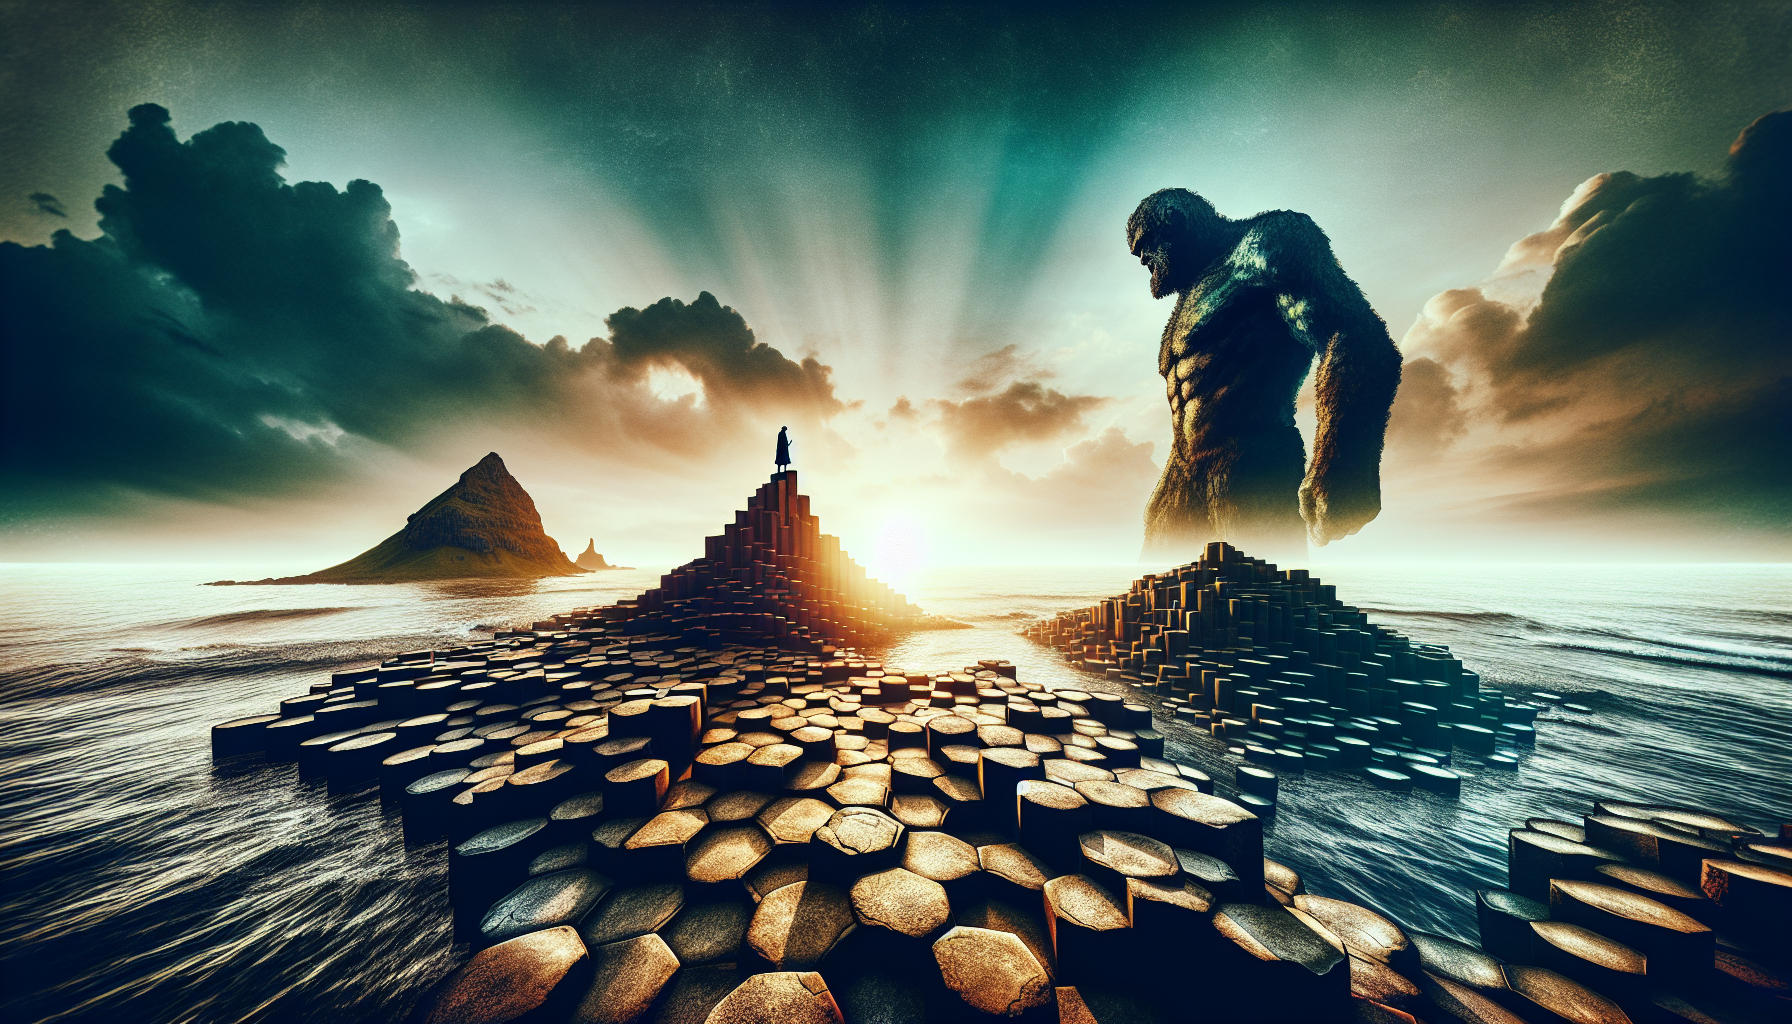 Illustration of the Giant's Causeway and the Scottish giant Benandonner